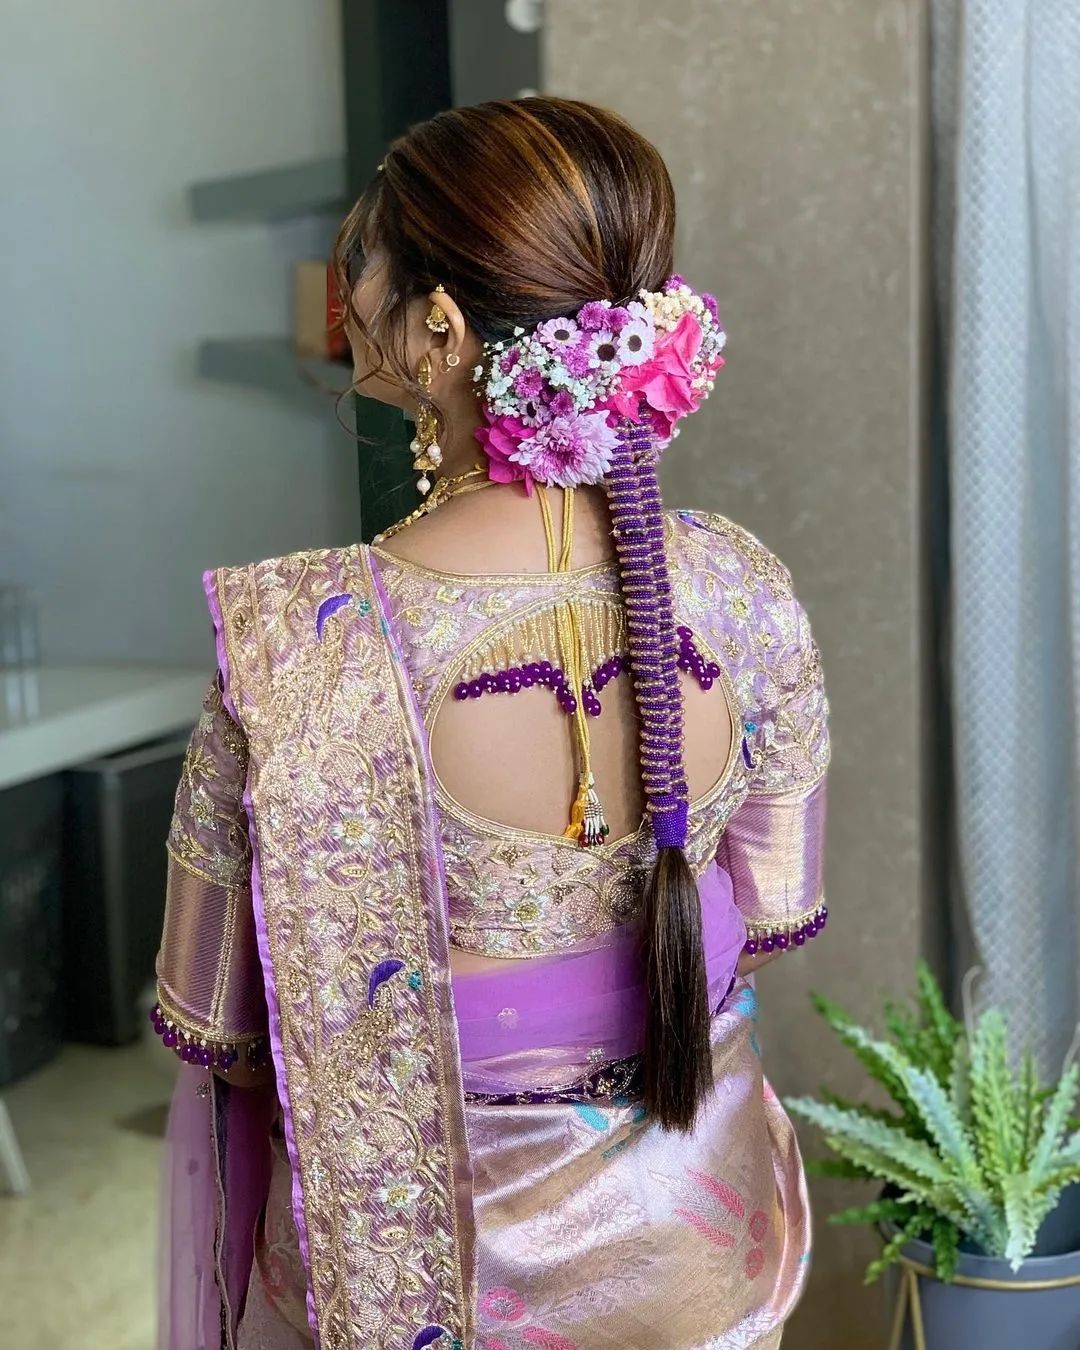 Lavanya Tripathi Inspired Easy Hairstyles To Try With Saree Look!